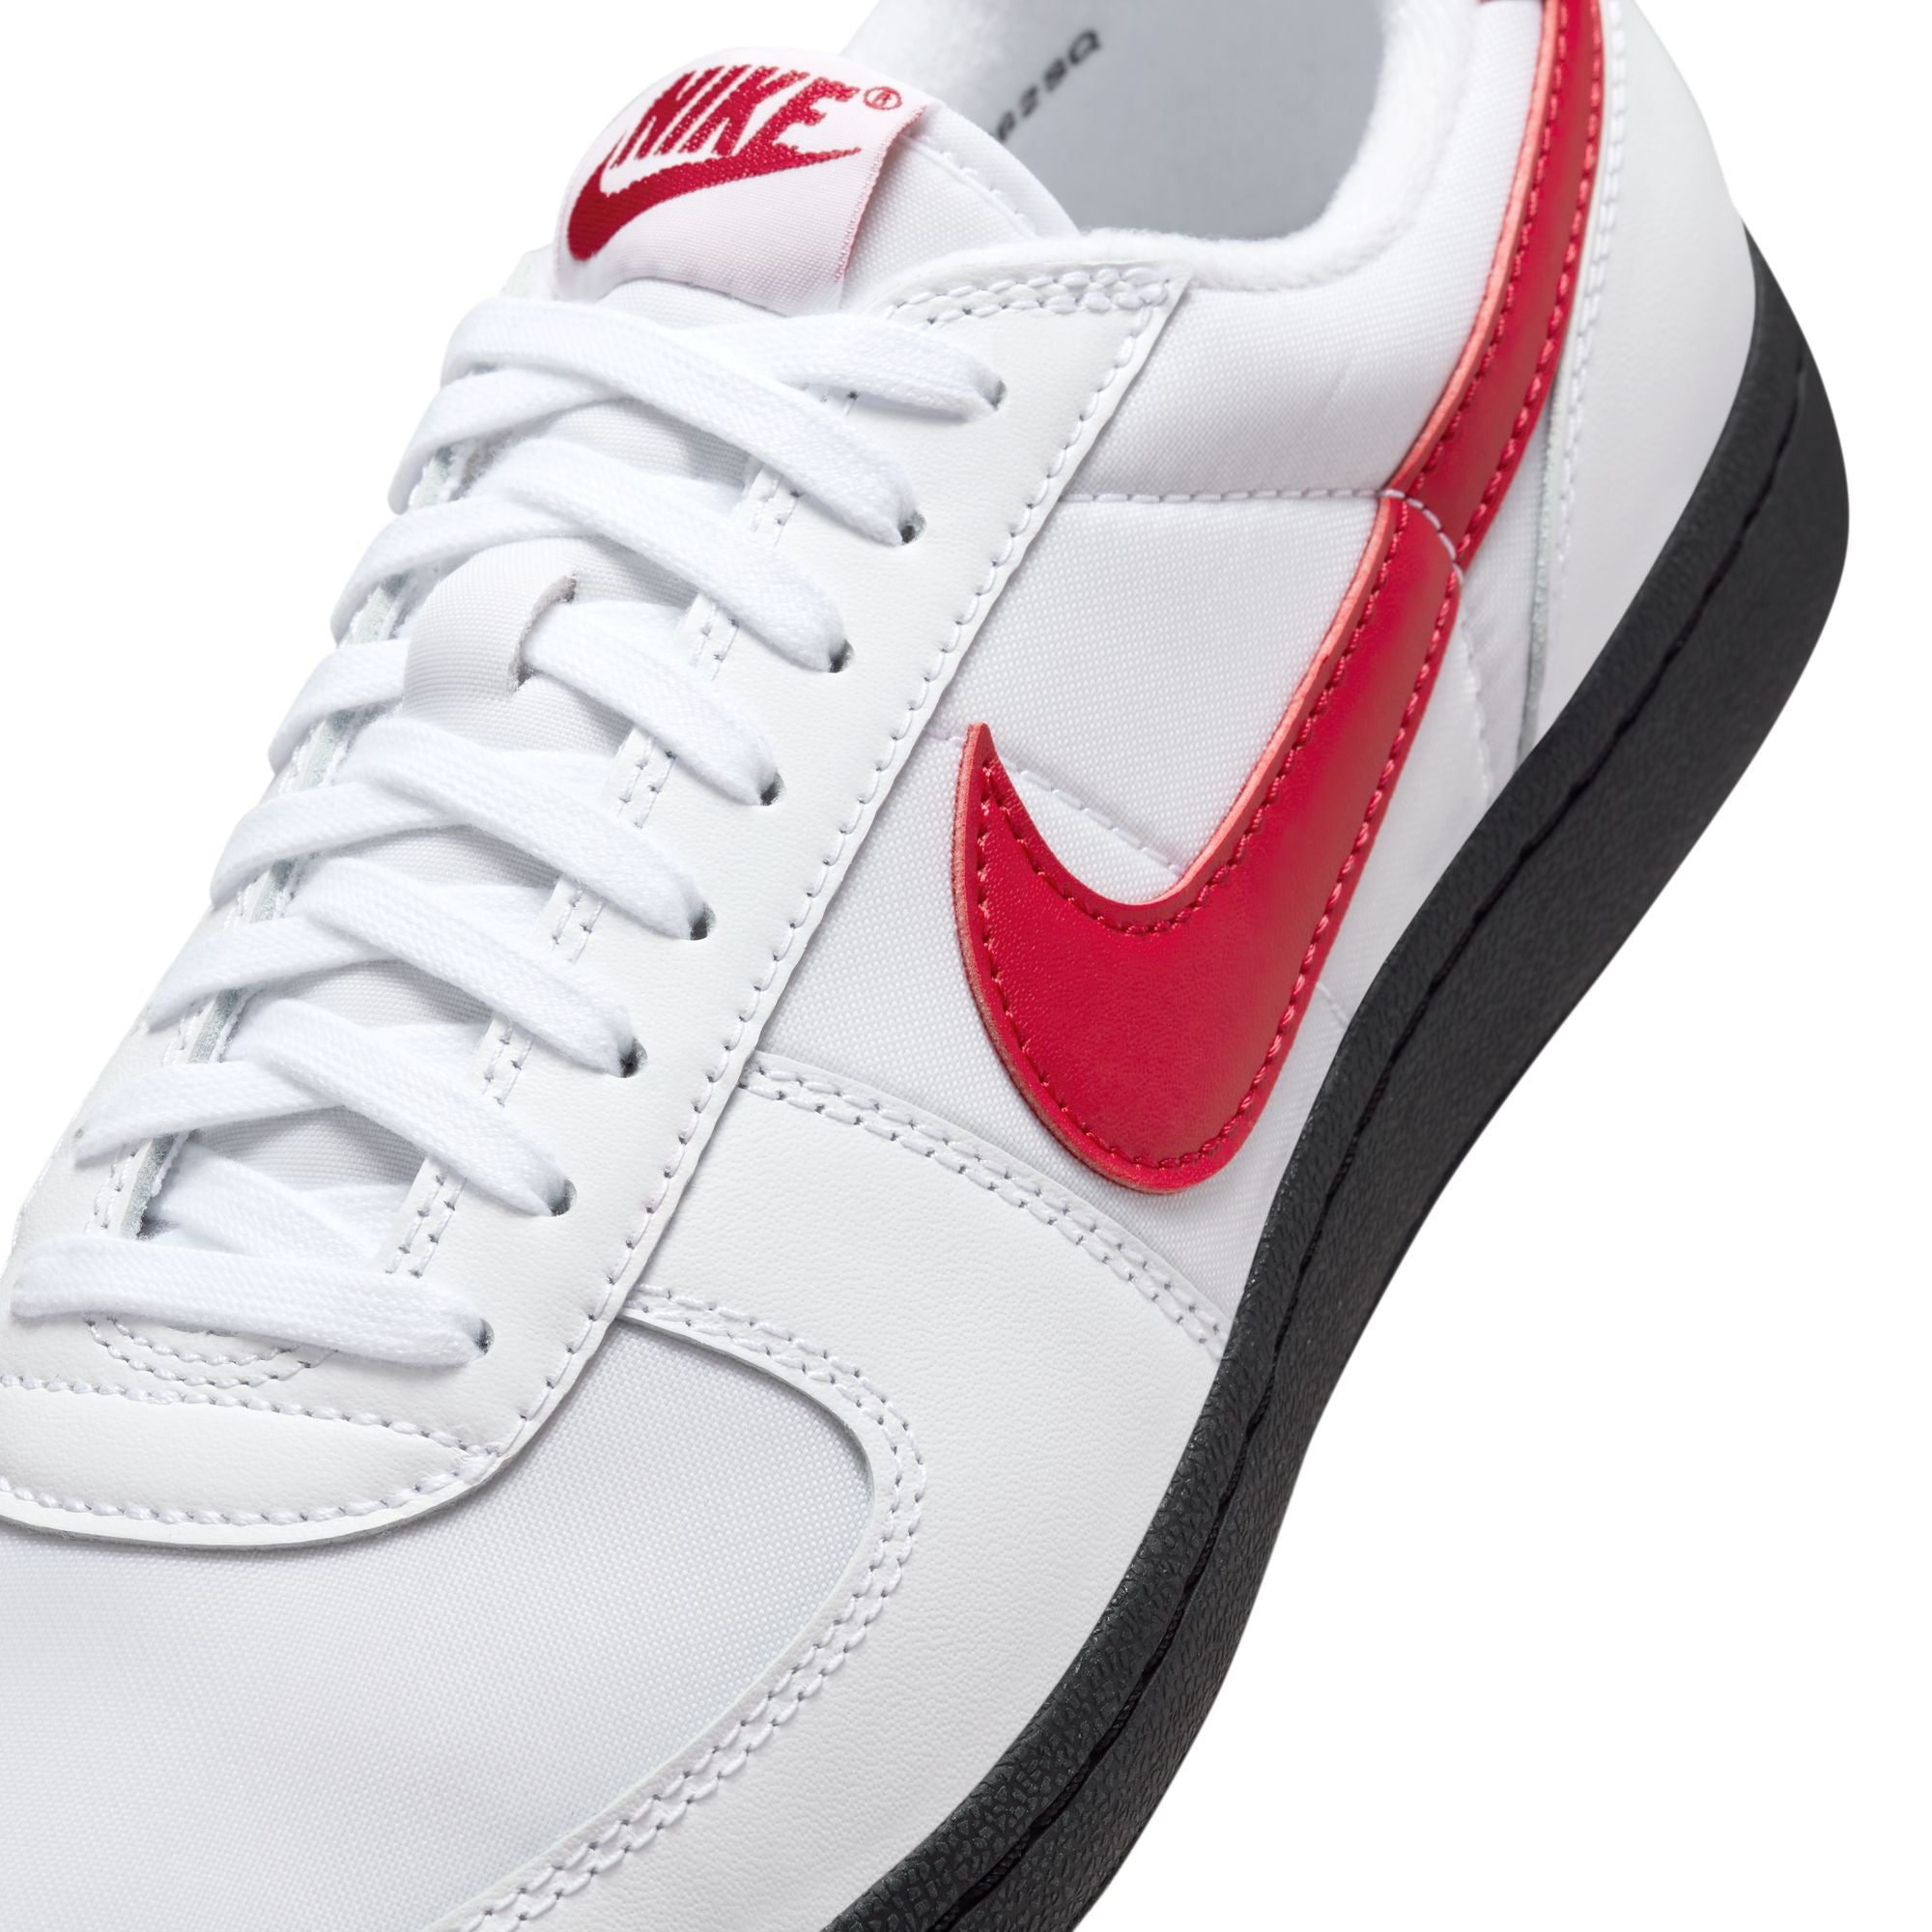 Field General 82 SP 'White Varsity Red' - INVINCIBLE